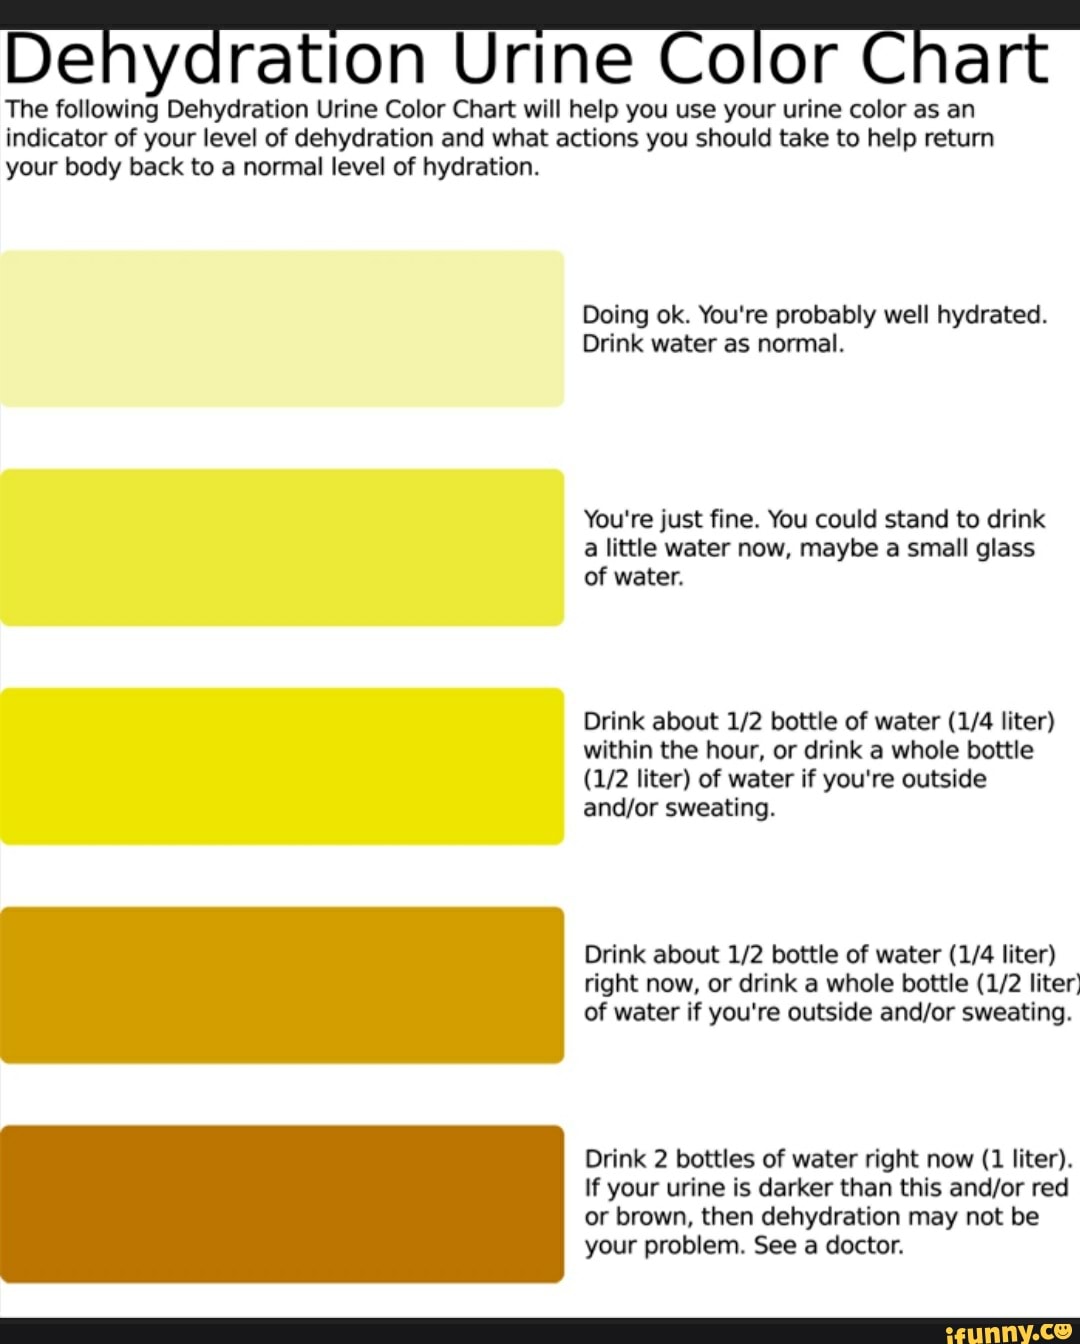 Urine Color Chart For Assessing Hydration And Dehydration Pee Color Sexiz Pix